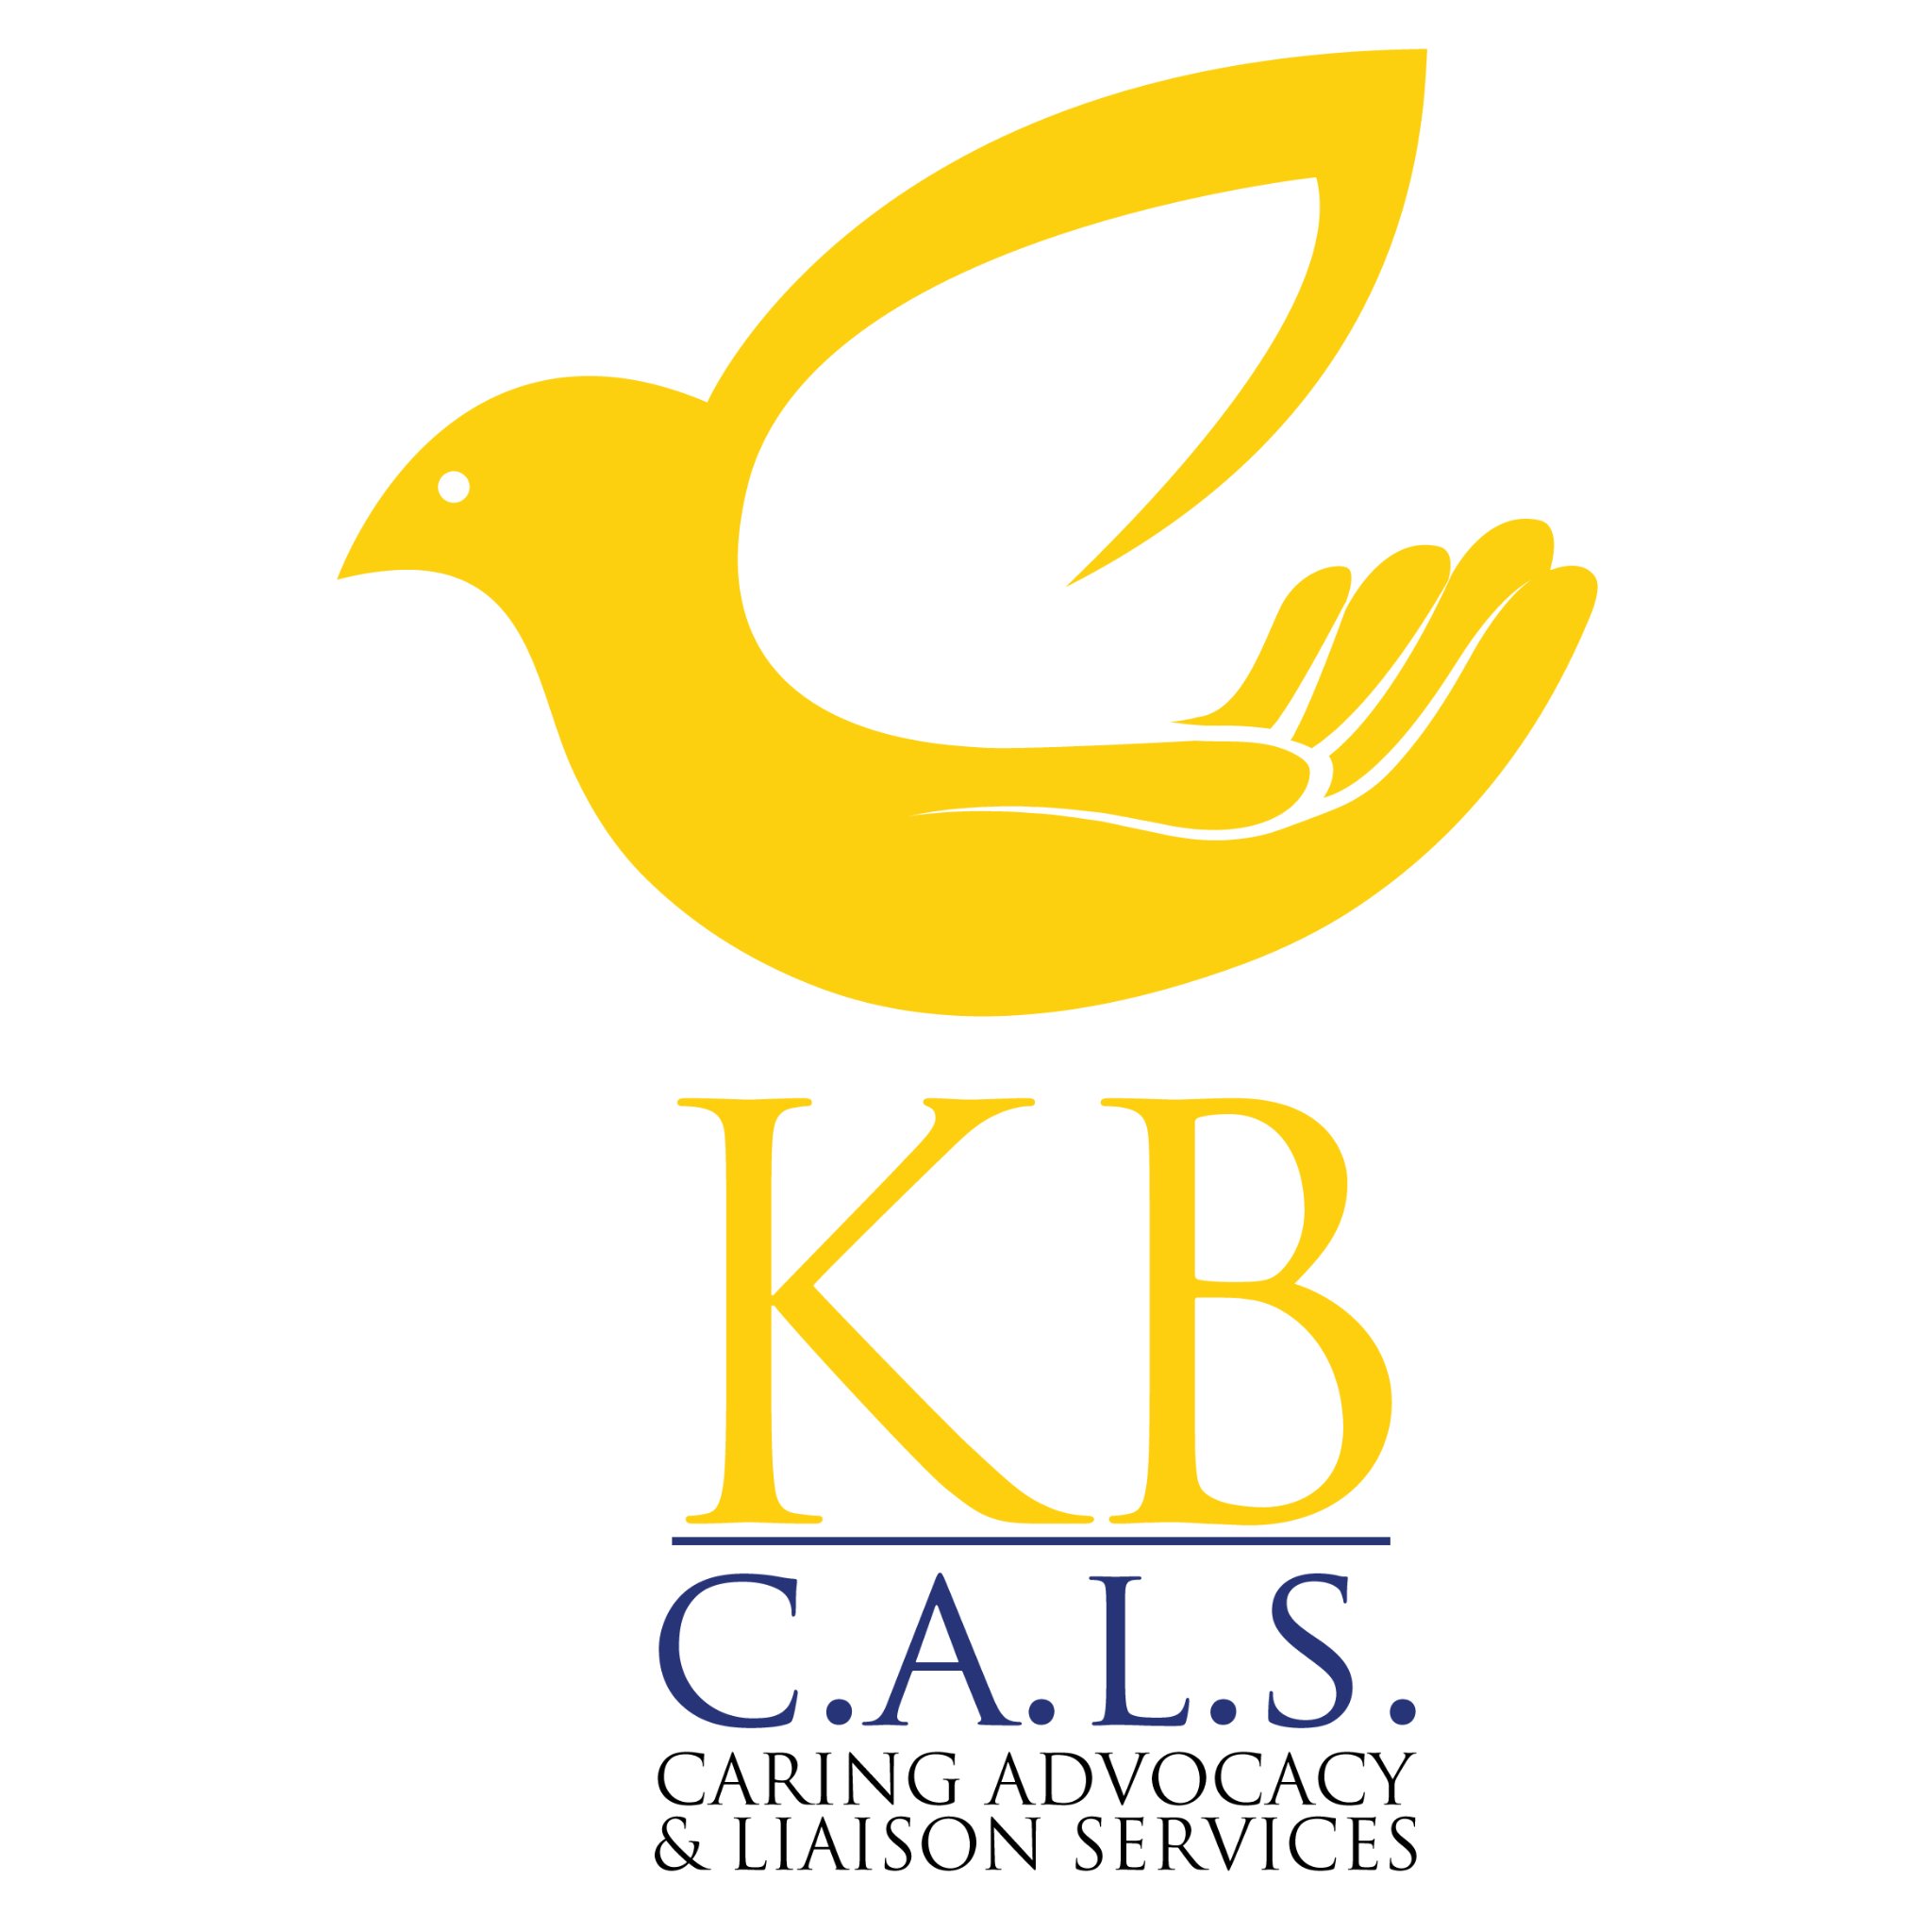 KB CALS - Caring Advocacy & Liaison Services